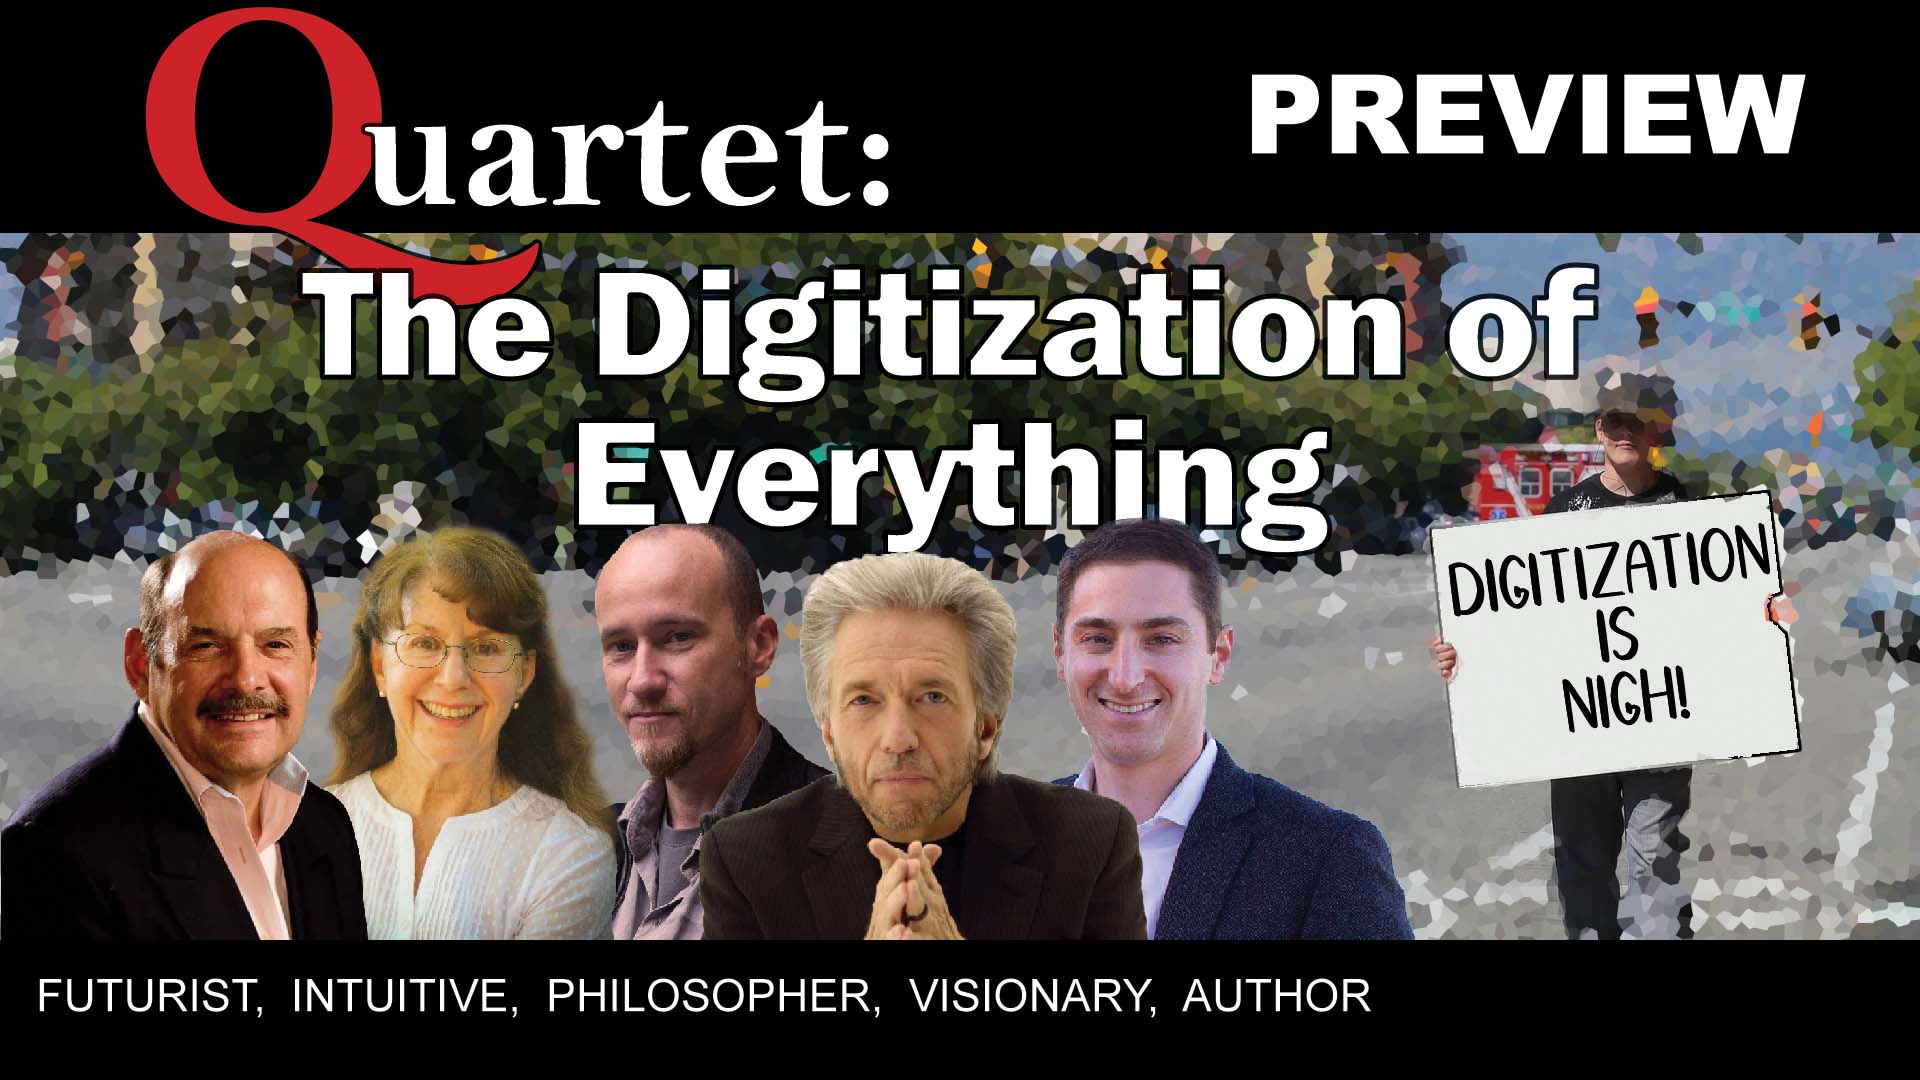 Quartet Preview, The digitization of everything